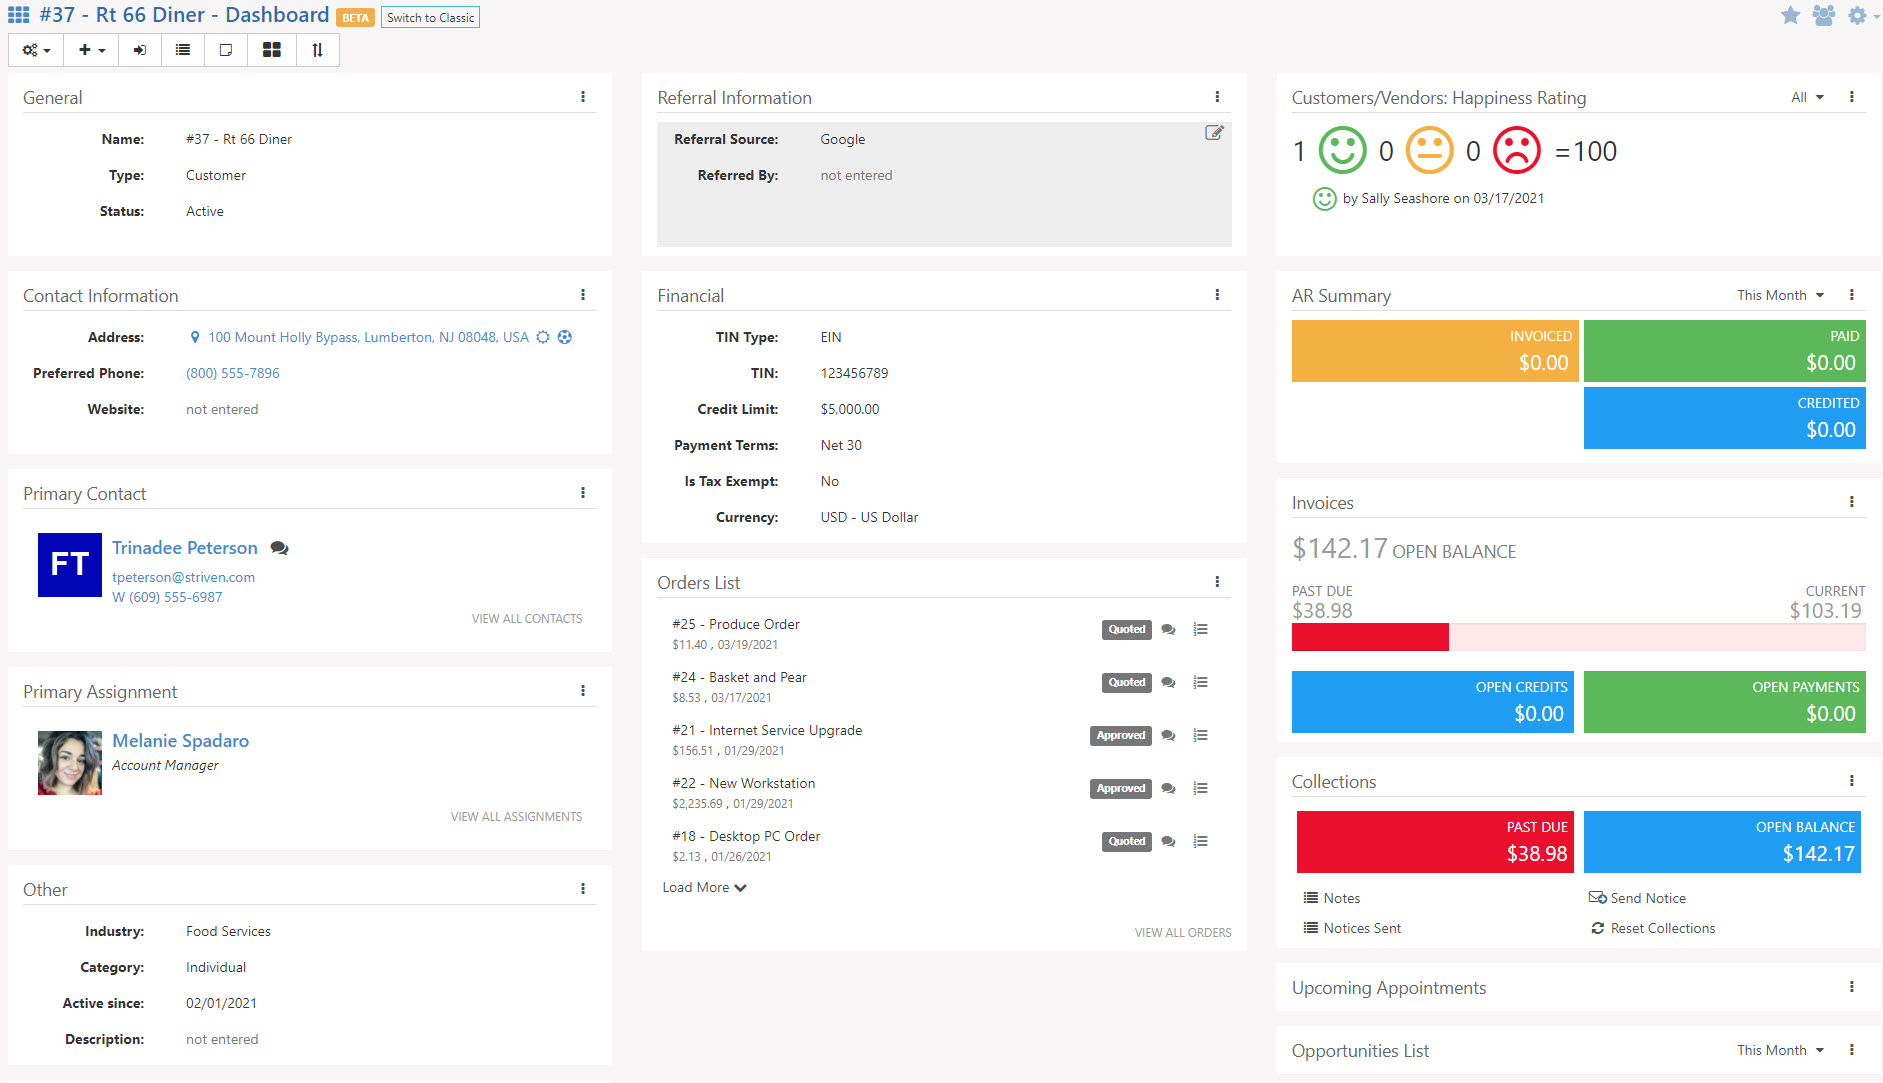 Customer Dashboard showing general info, contact info, primary contact, primary assignment, referral info, Financial info, Orders list, Happiness Rating, AR Summary, Invoices, and Collections